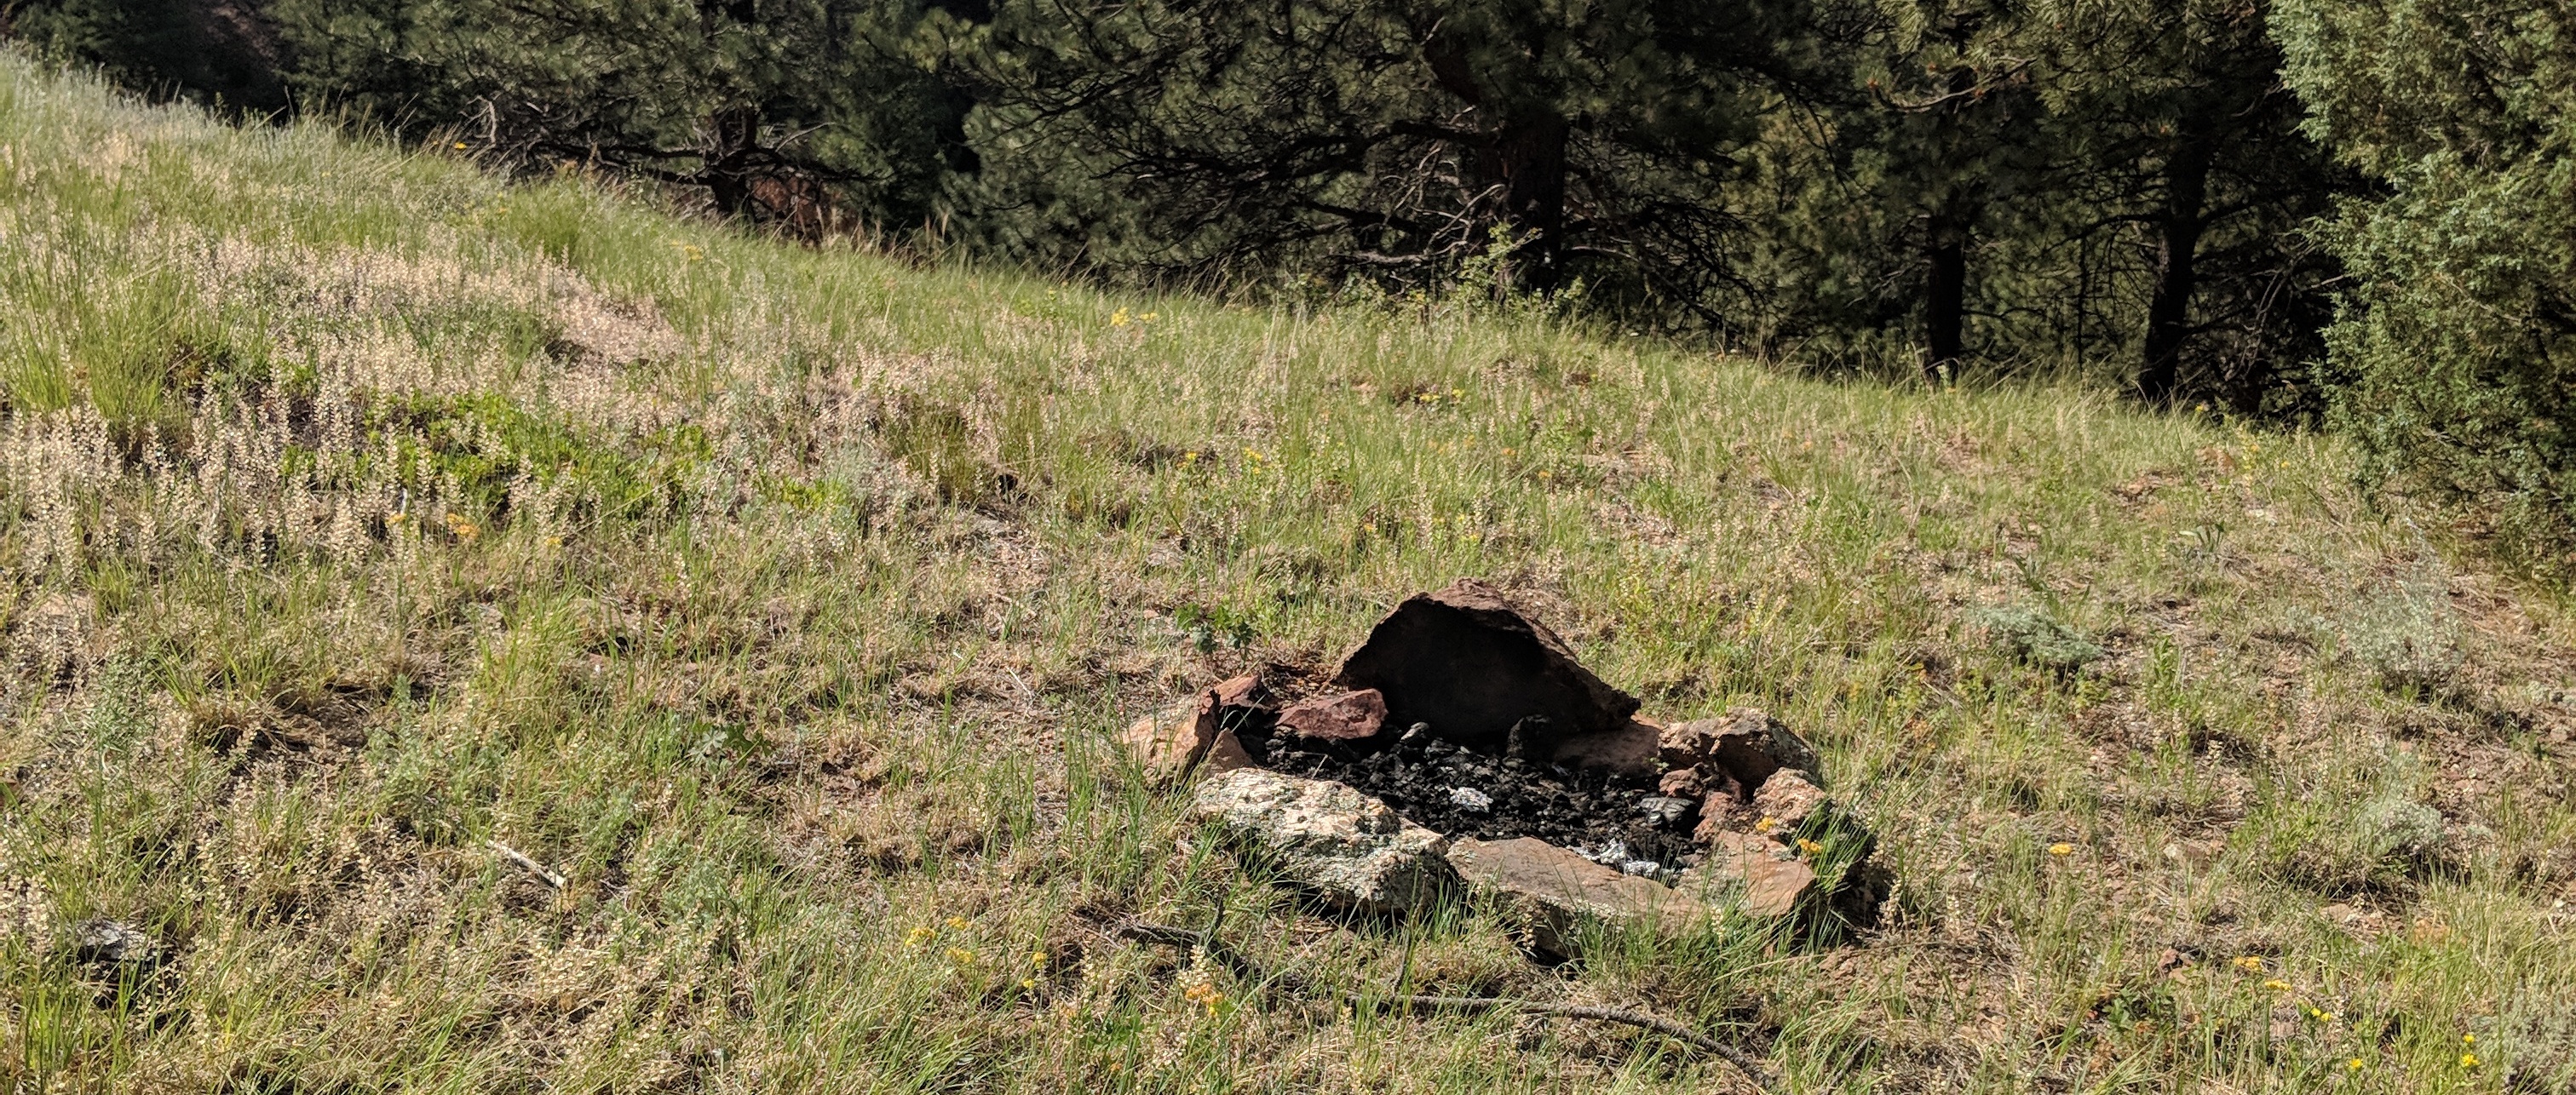 Illegal/Unattended Campfire